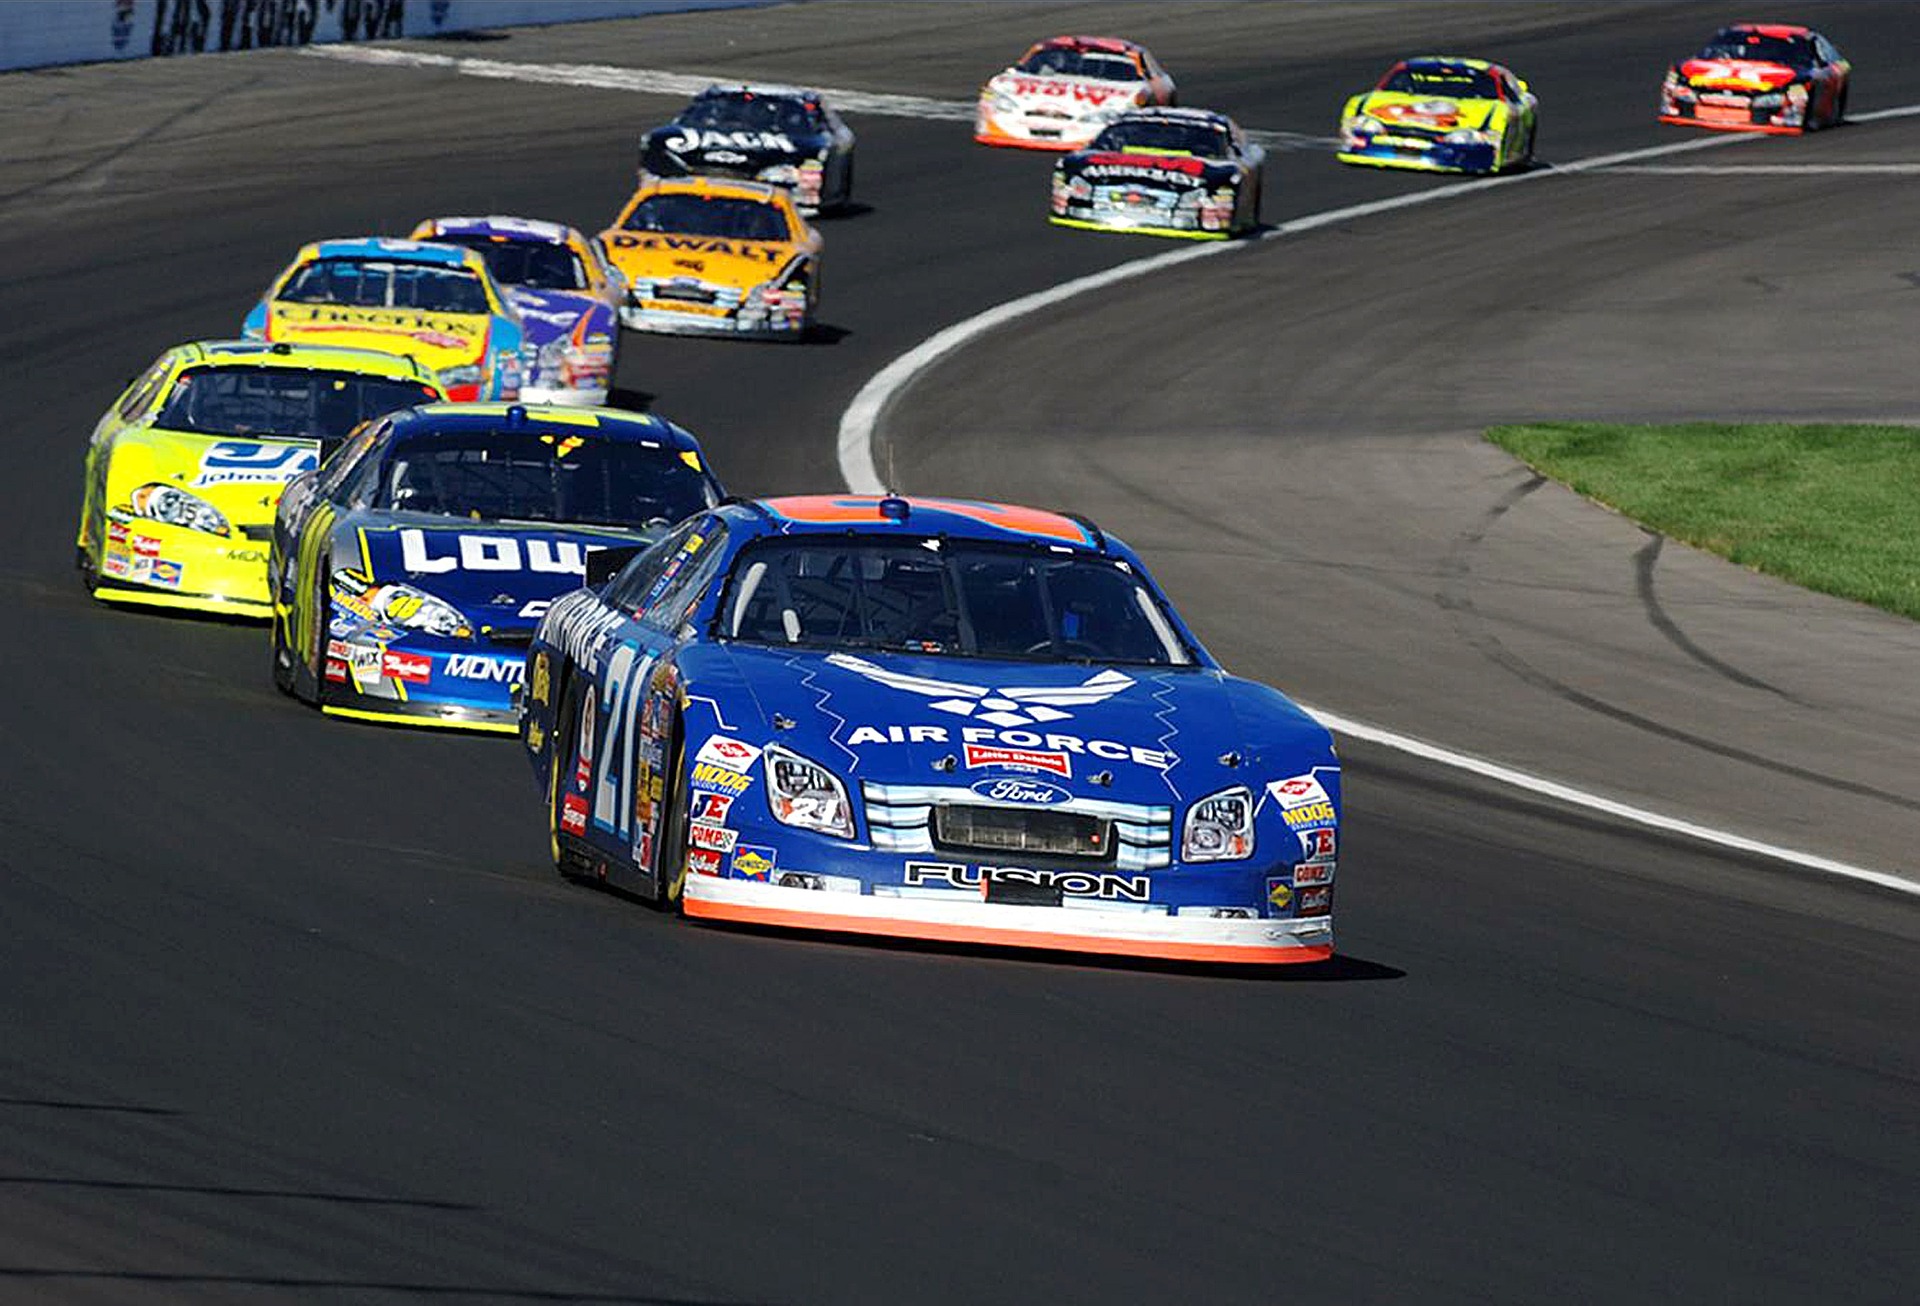 Additionality You Can Count On Part III: Renewable Energy, Market Transformation, and NASCAR